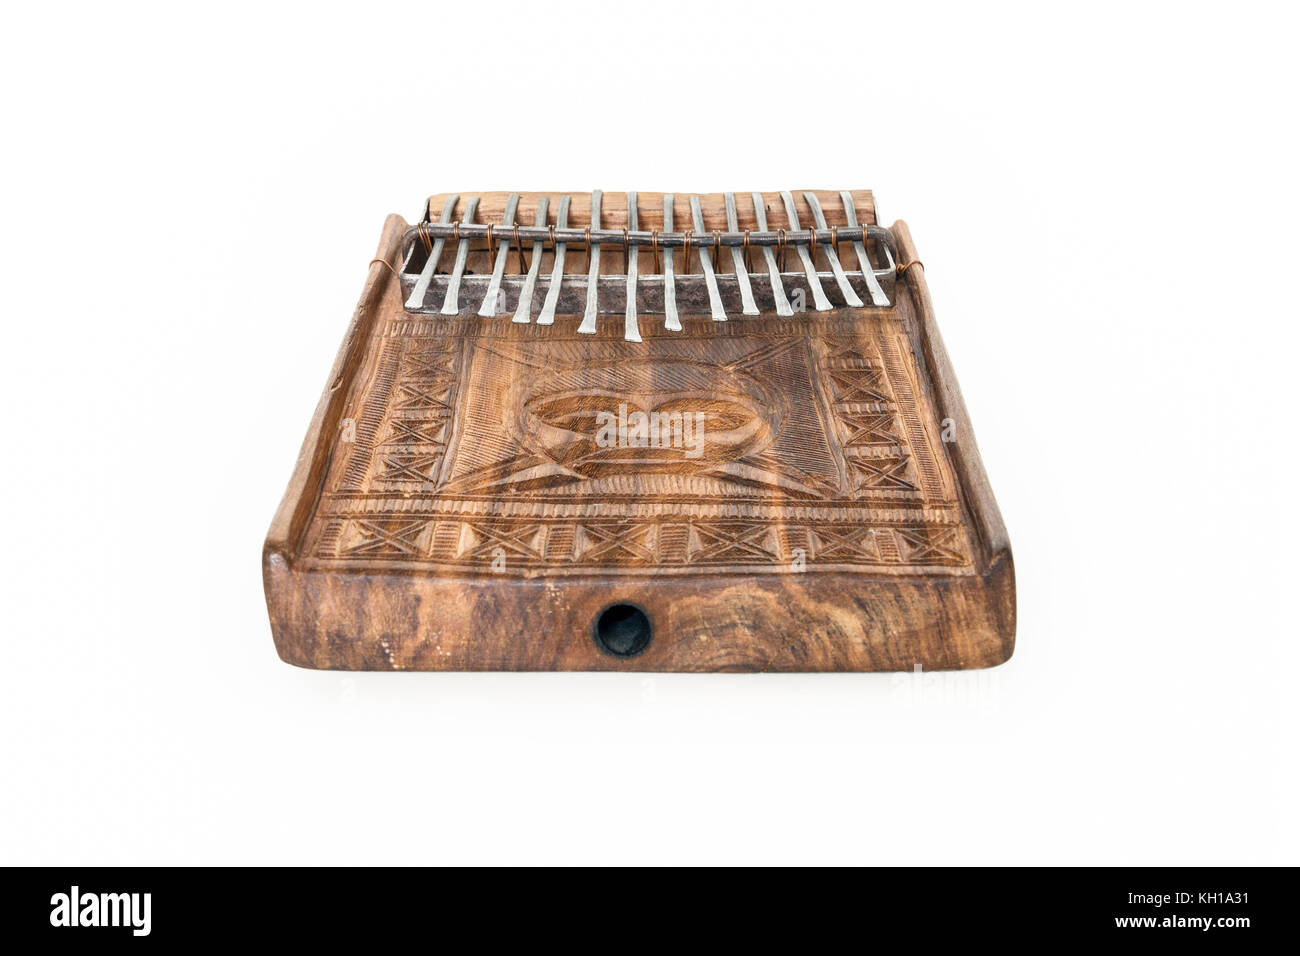 Traditional mbira, an African musical instrument consisting of a wooden sounding board and metal pronged keys, from Zimbabwe Stock Photo